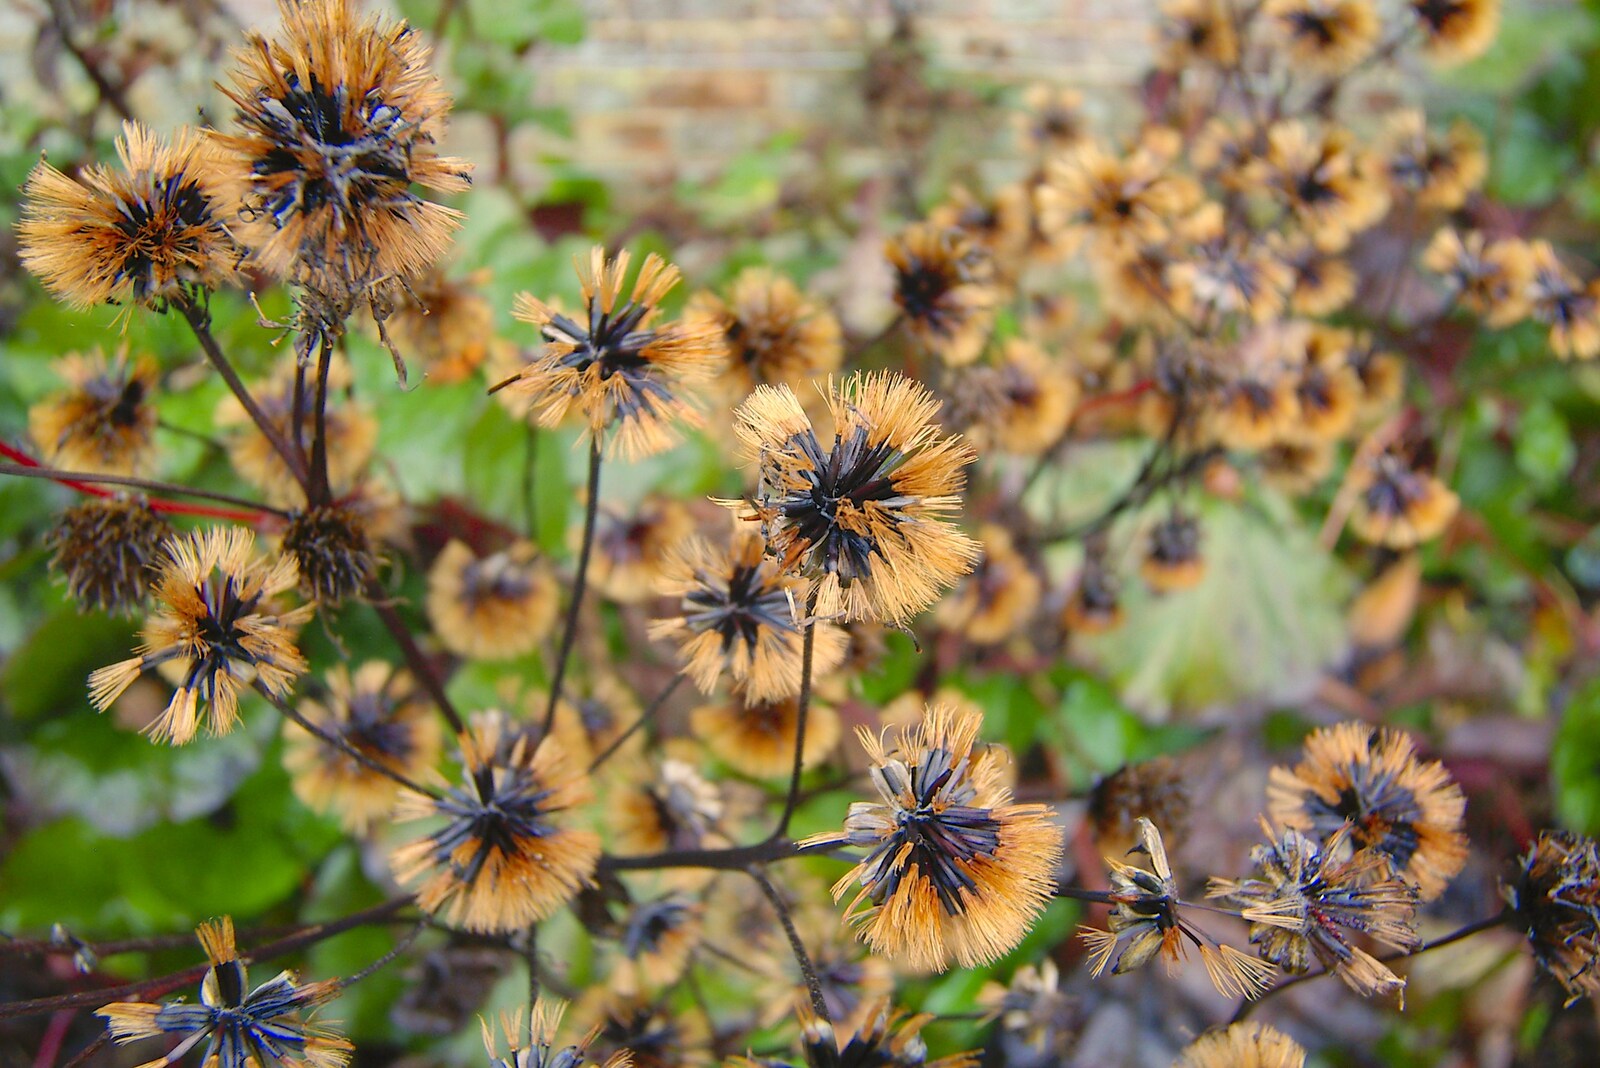 Black and tan seed heads from Thornham Walled Garden, and Bob Last Leaves the Lab, Cambridge - 20th November 2005